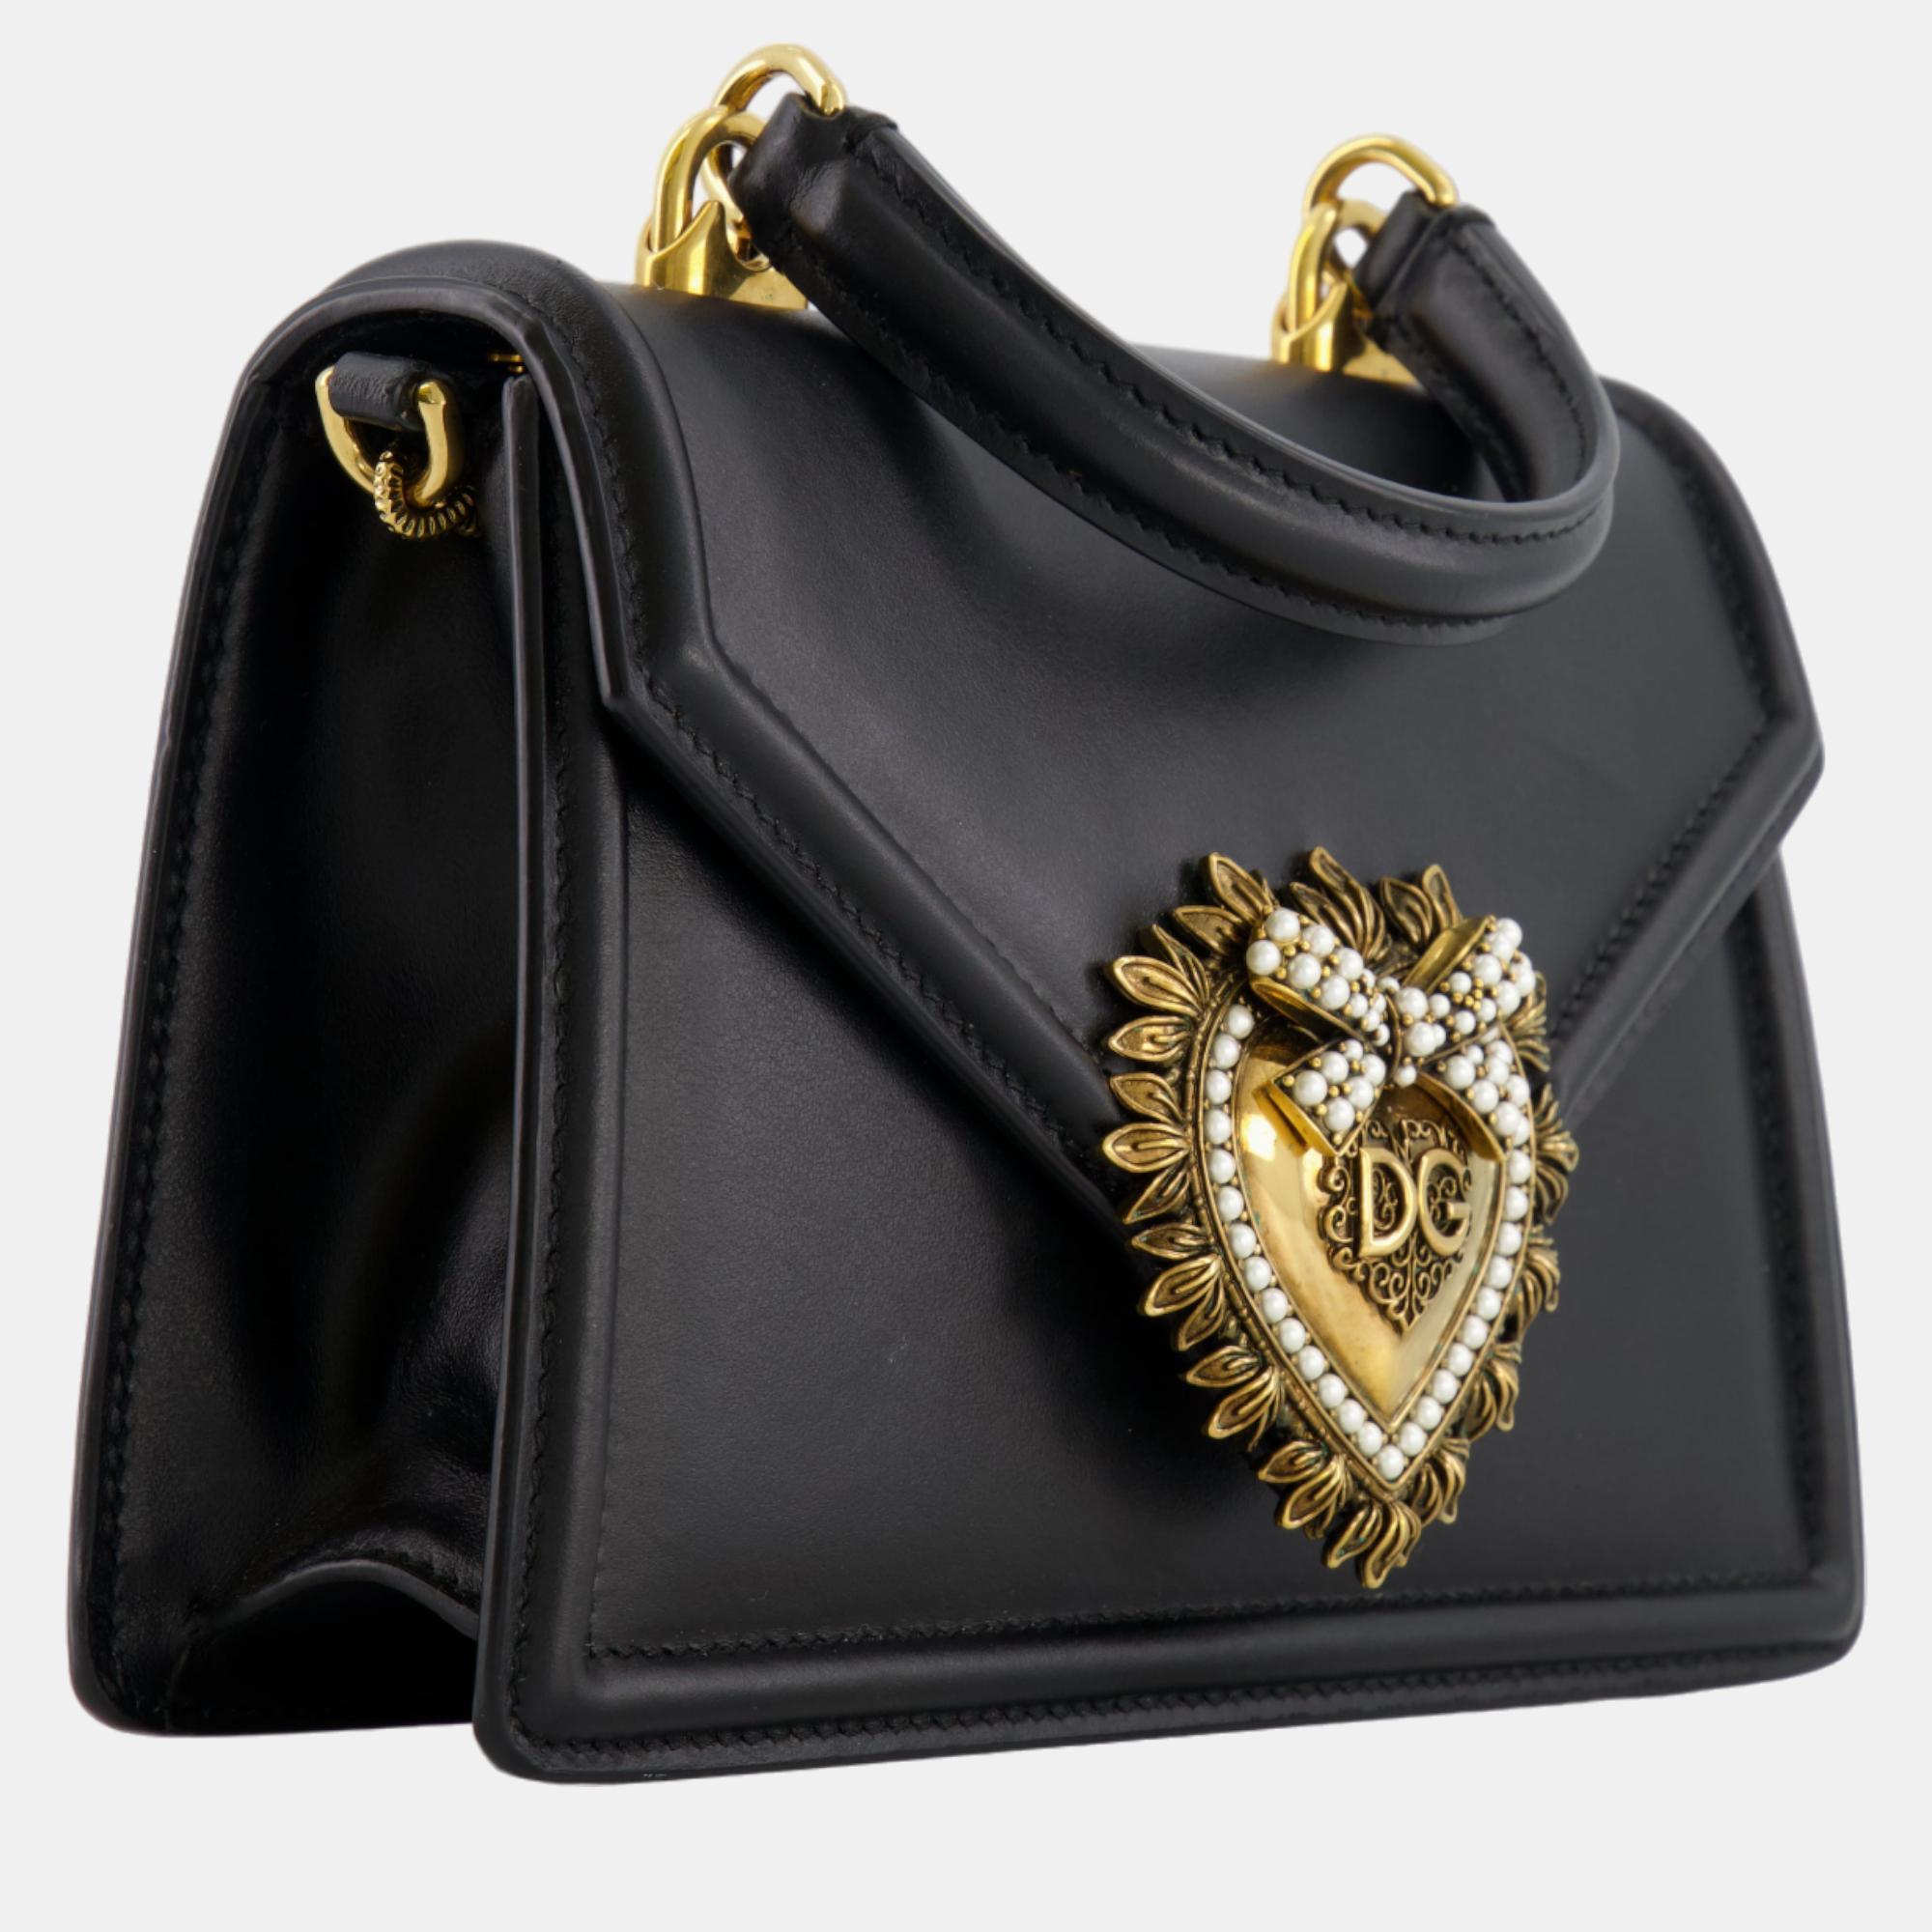 

Dolce & Gabbana Black Leather Small Devotion Top-Handle Bag with Gold Hardware